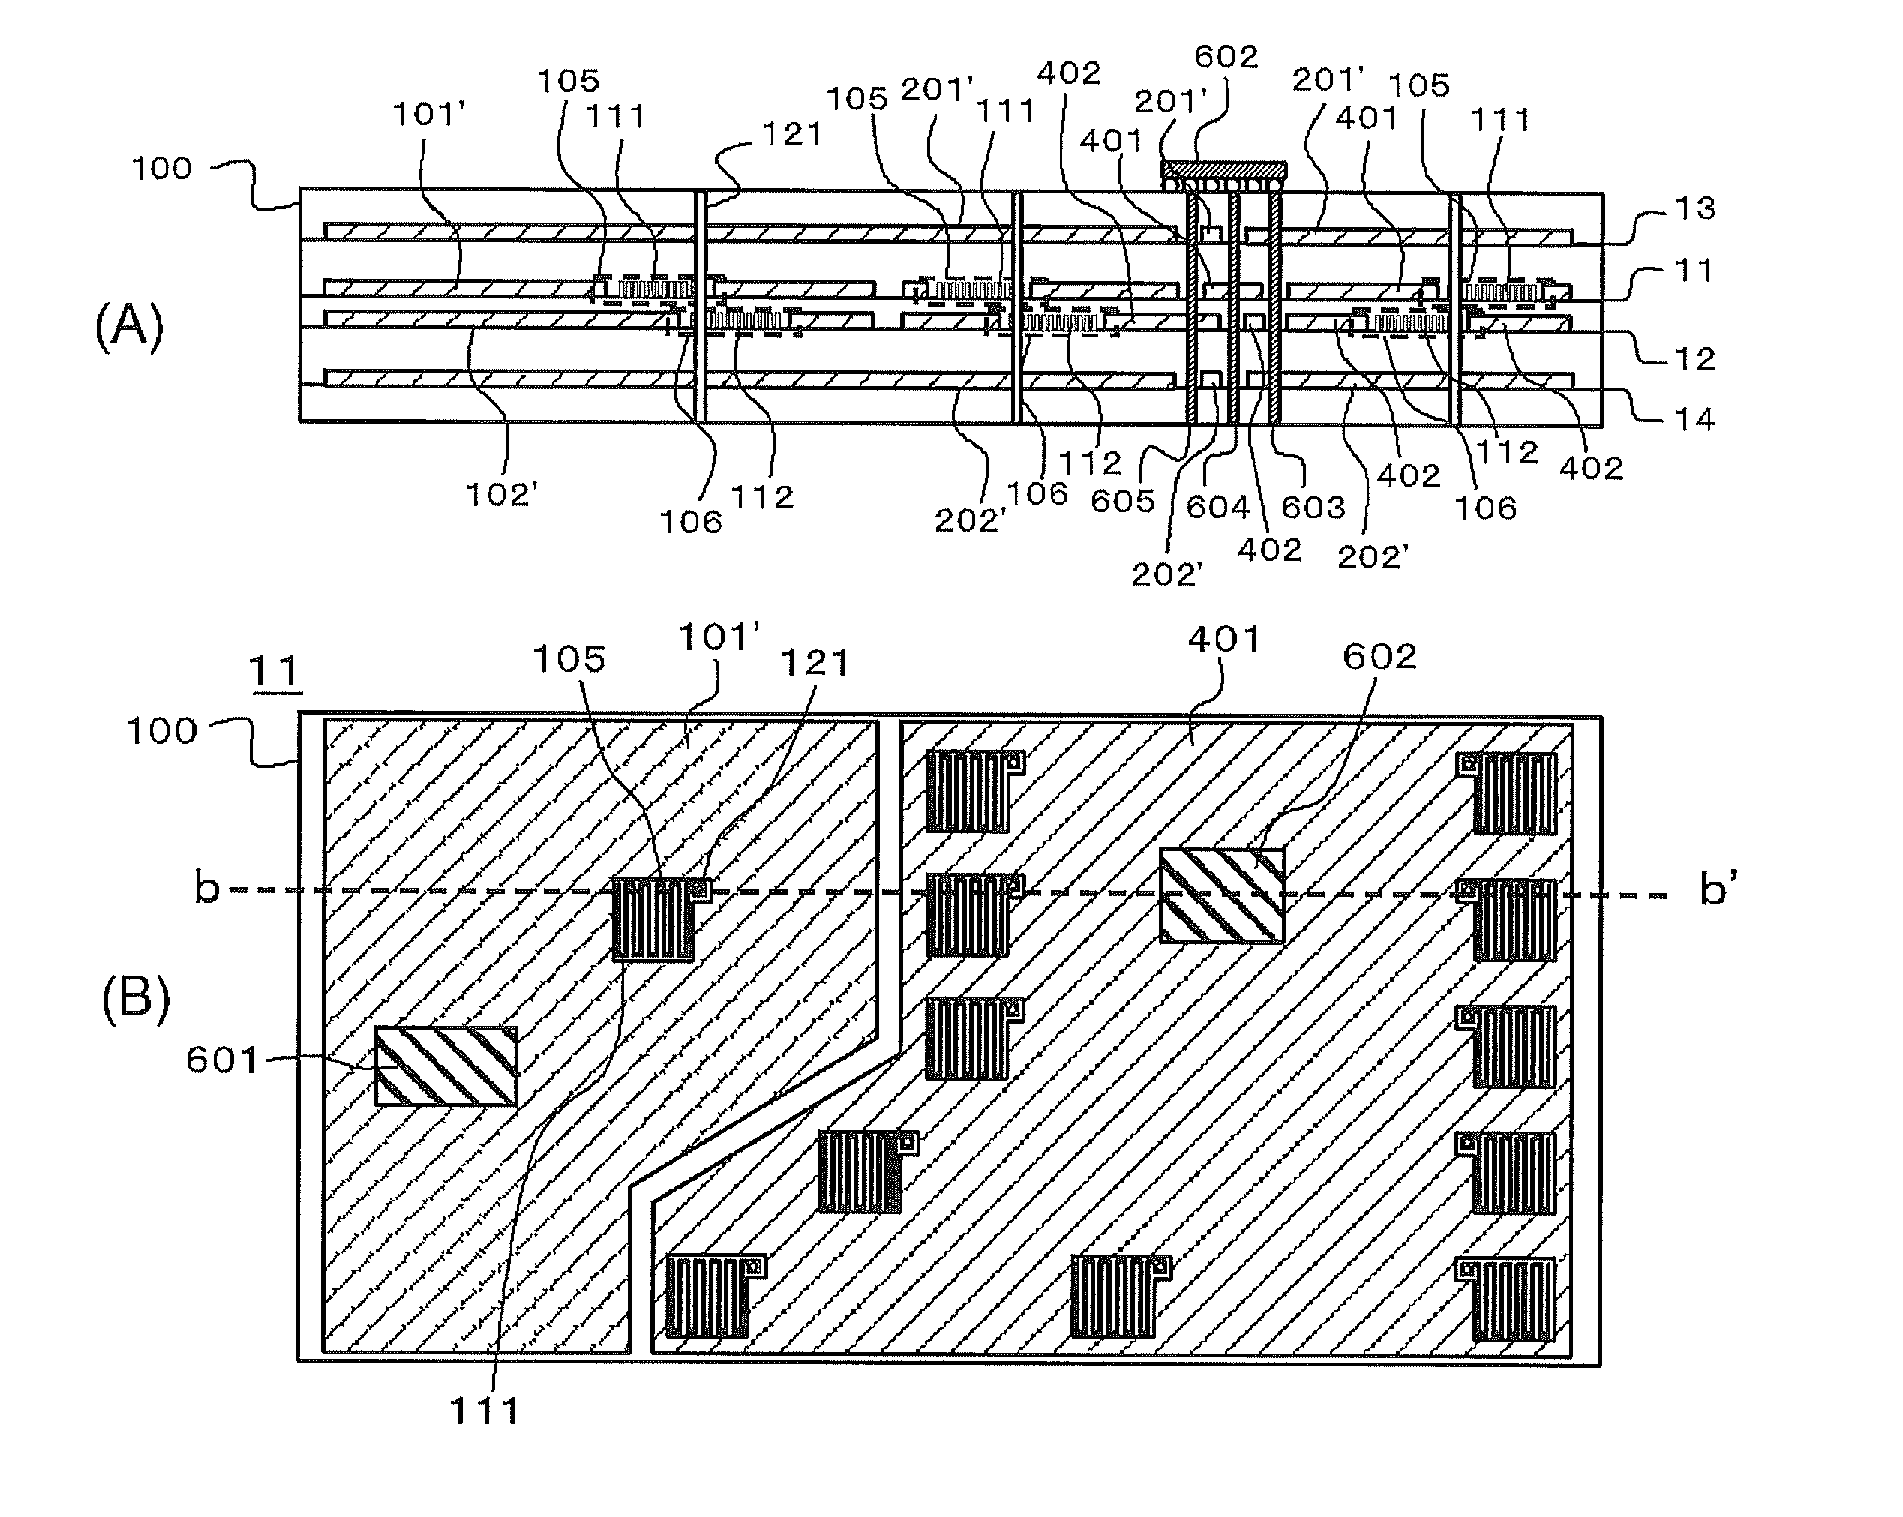 Structural body and interconnect substrate